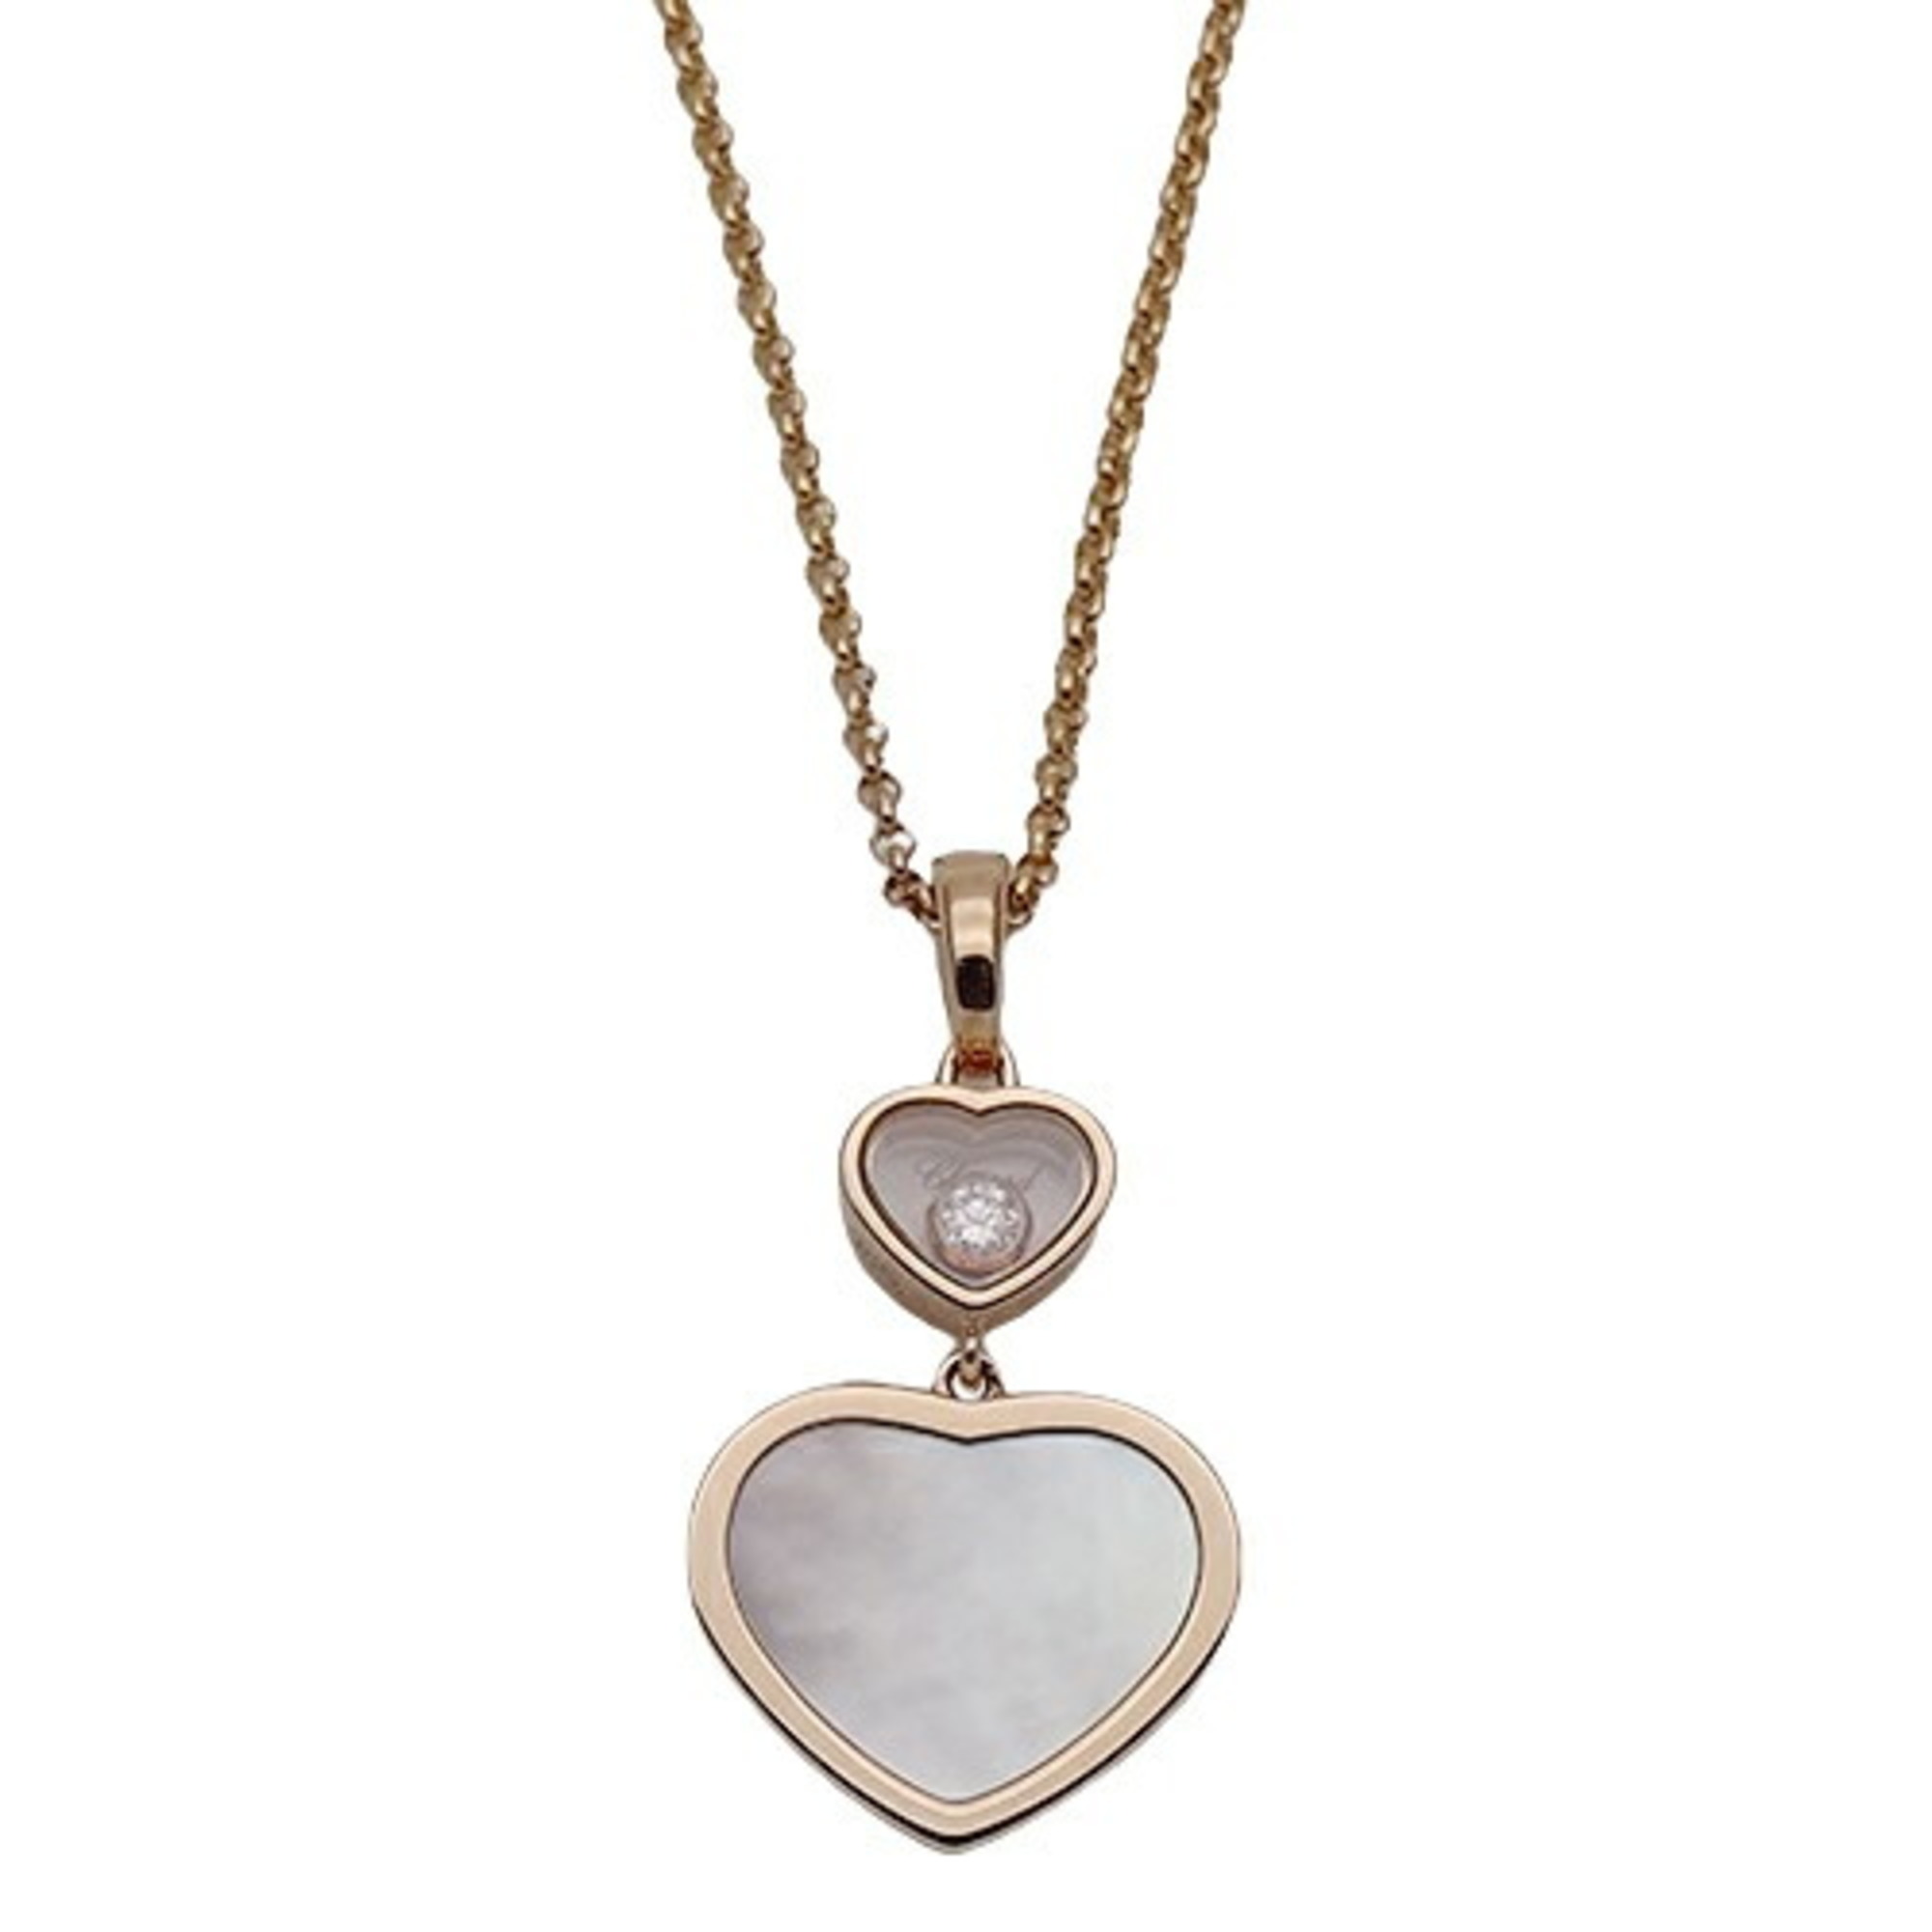 Chopard Necklace for Women 750PG Diamond Mother of Pearl Happy Heart Pink Gold 79A001 Polished